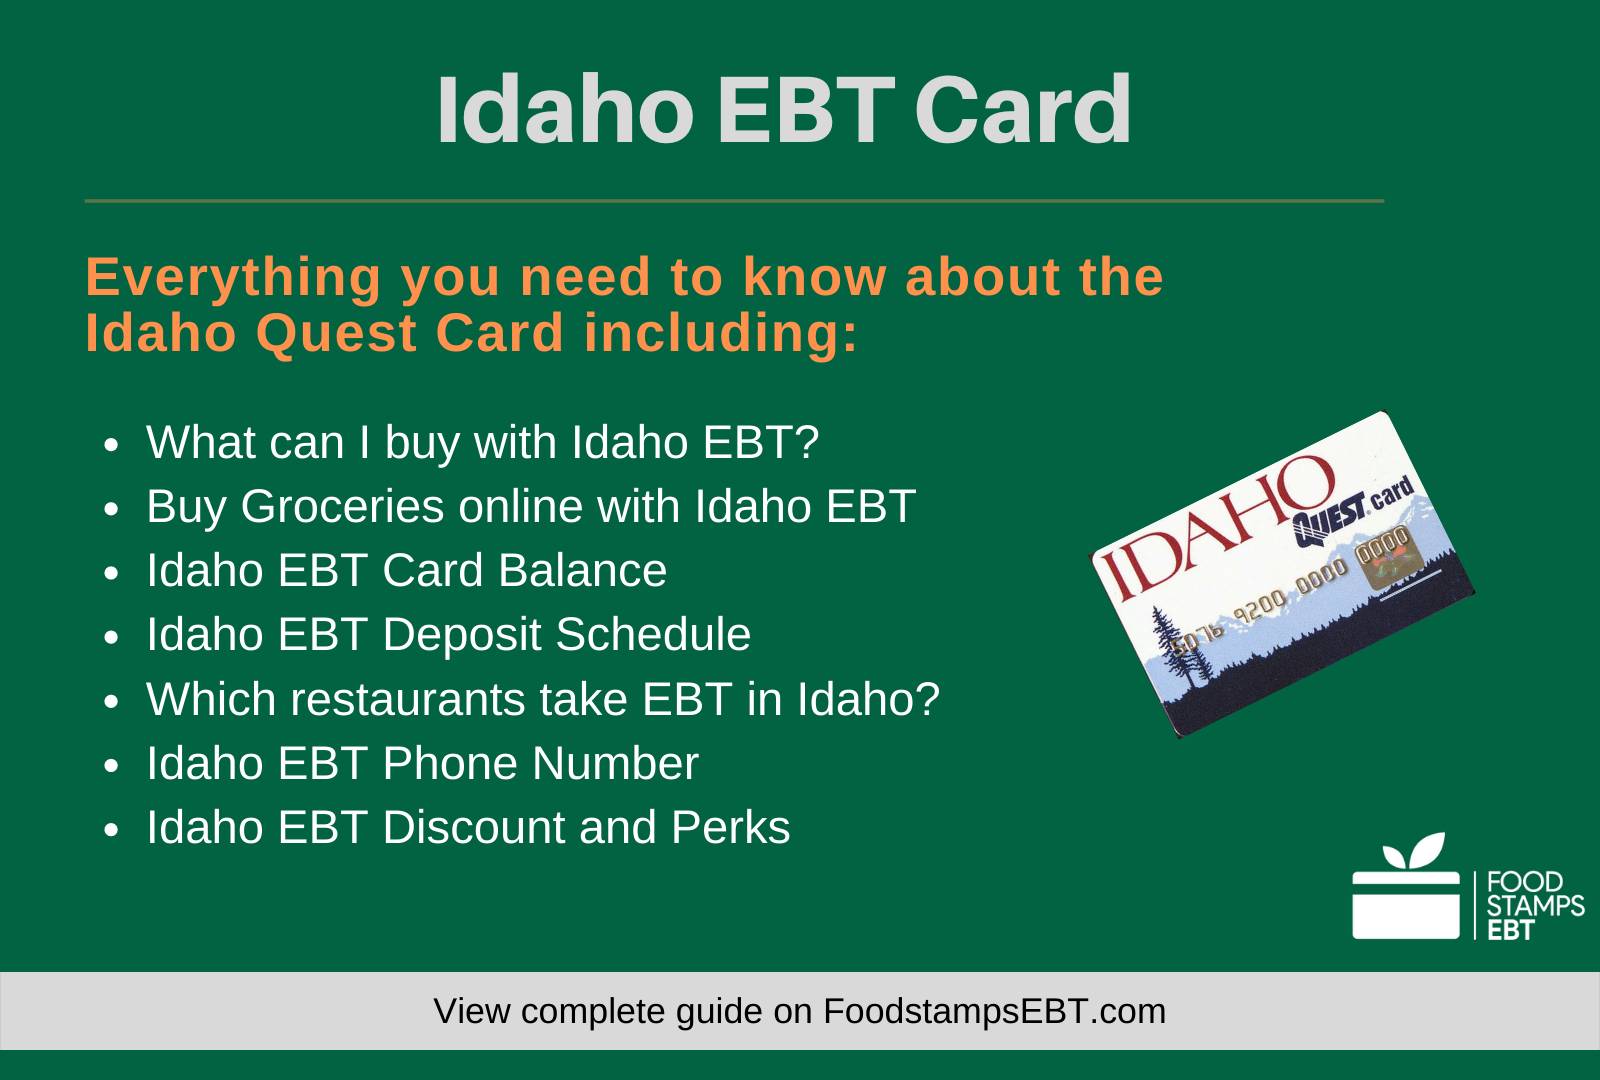 "Idaho EBT Card Questions and Answers"